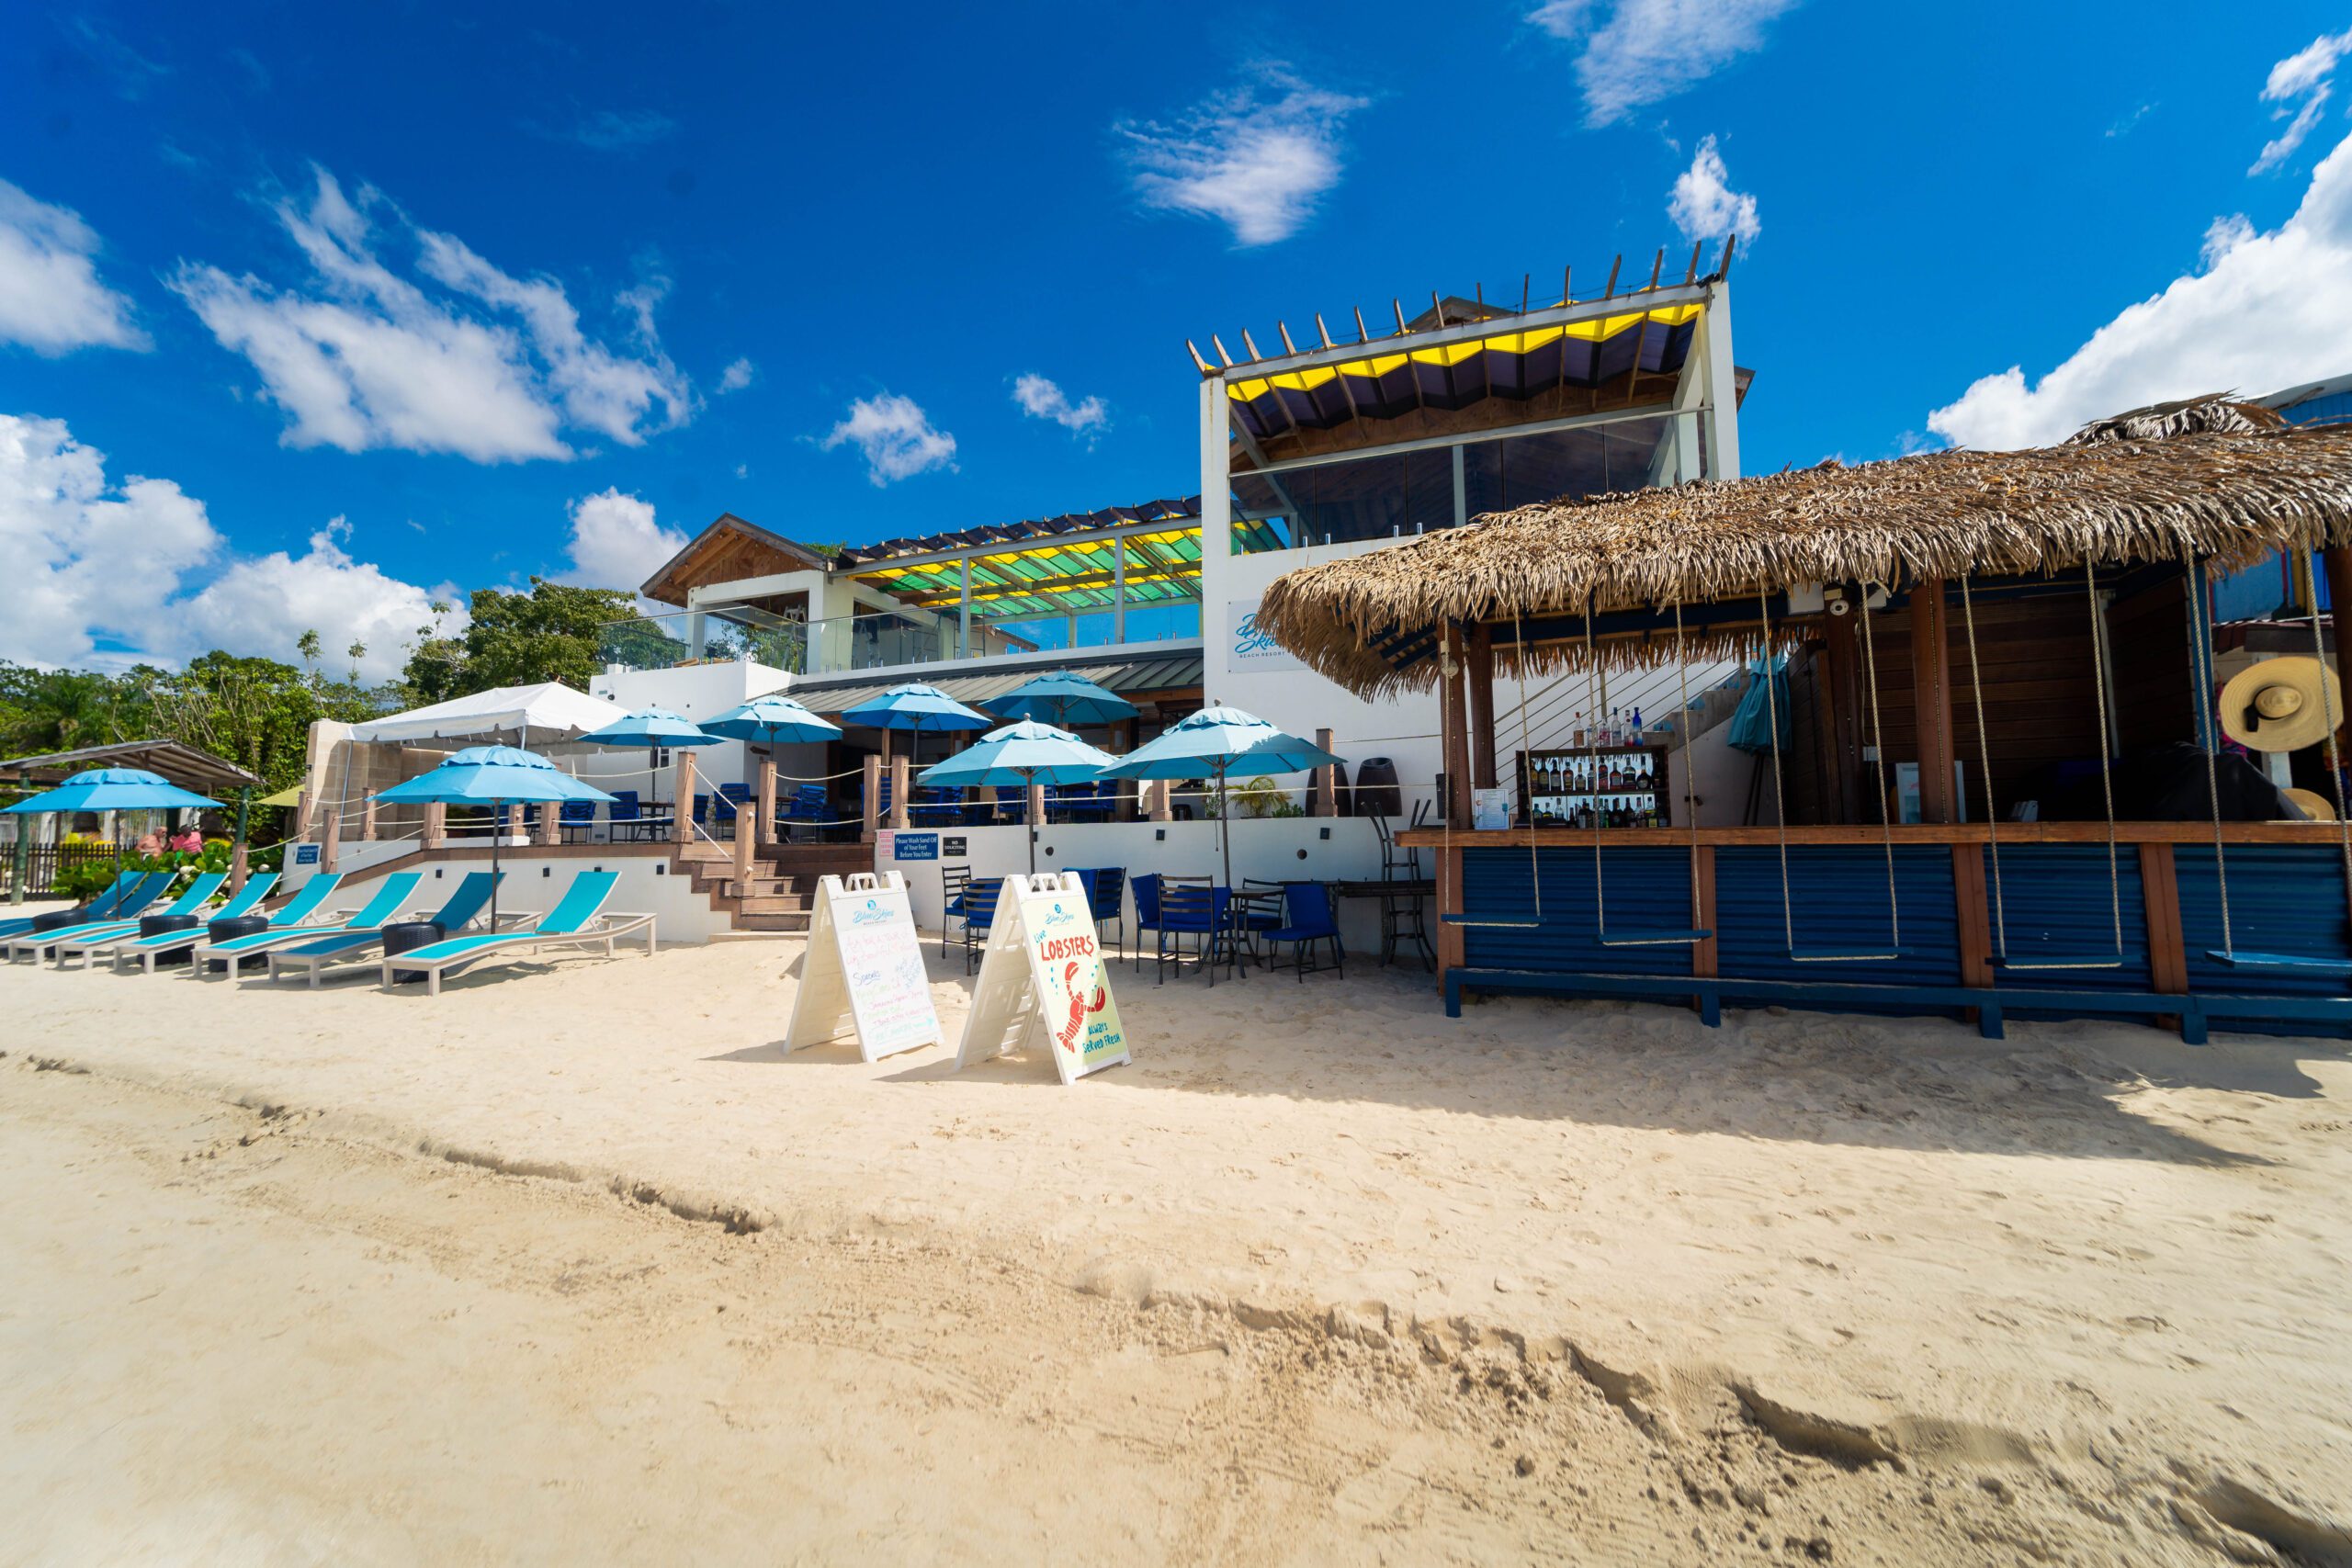 Unwind and Rejuvenate: Spa and Wellness Options in Negril